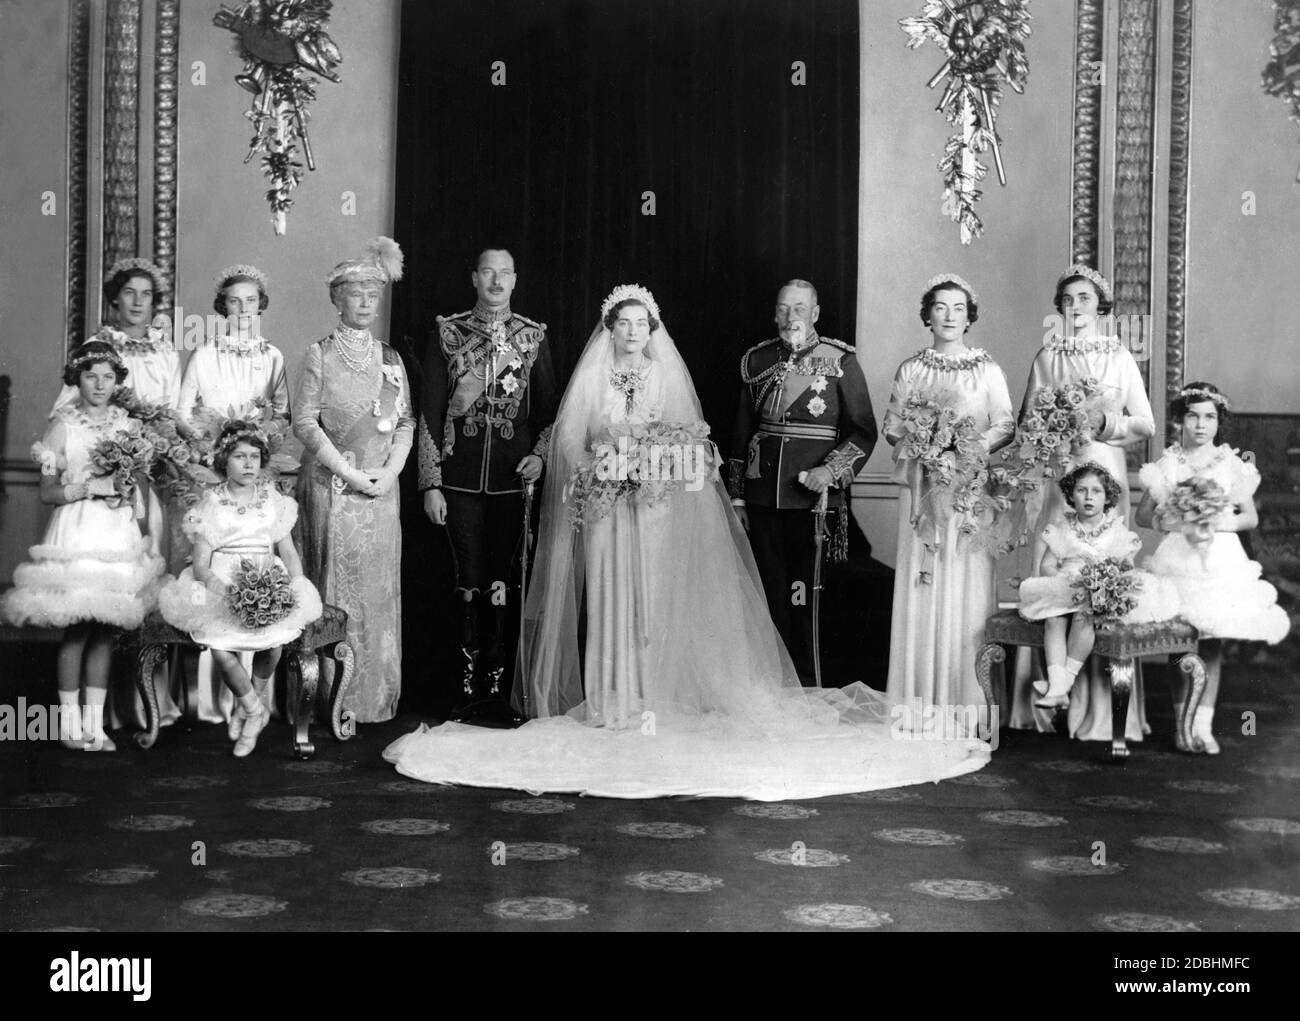 Elizabeth II at the wedding of Duke Henry of Gloucester and Lady Alice Scott (back row centre). Last row from left to right: Miss Claire Phipps, Lady Elizabeth Scott, Queen Mary, the wedding couple, King George V, Lady Angela Scott and Miss Moyra Scott. First row from left to right: Lady Mary Cambridge, Princess Elizabeth of York, Princess Margaret Rose of York and Miss Ann Hawkins. Stock Photo